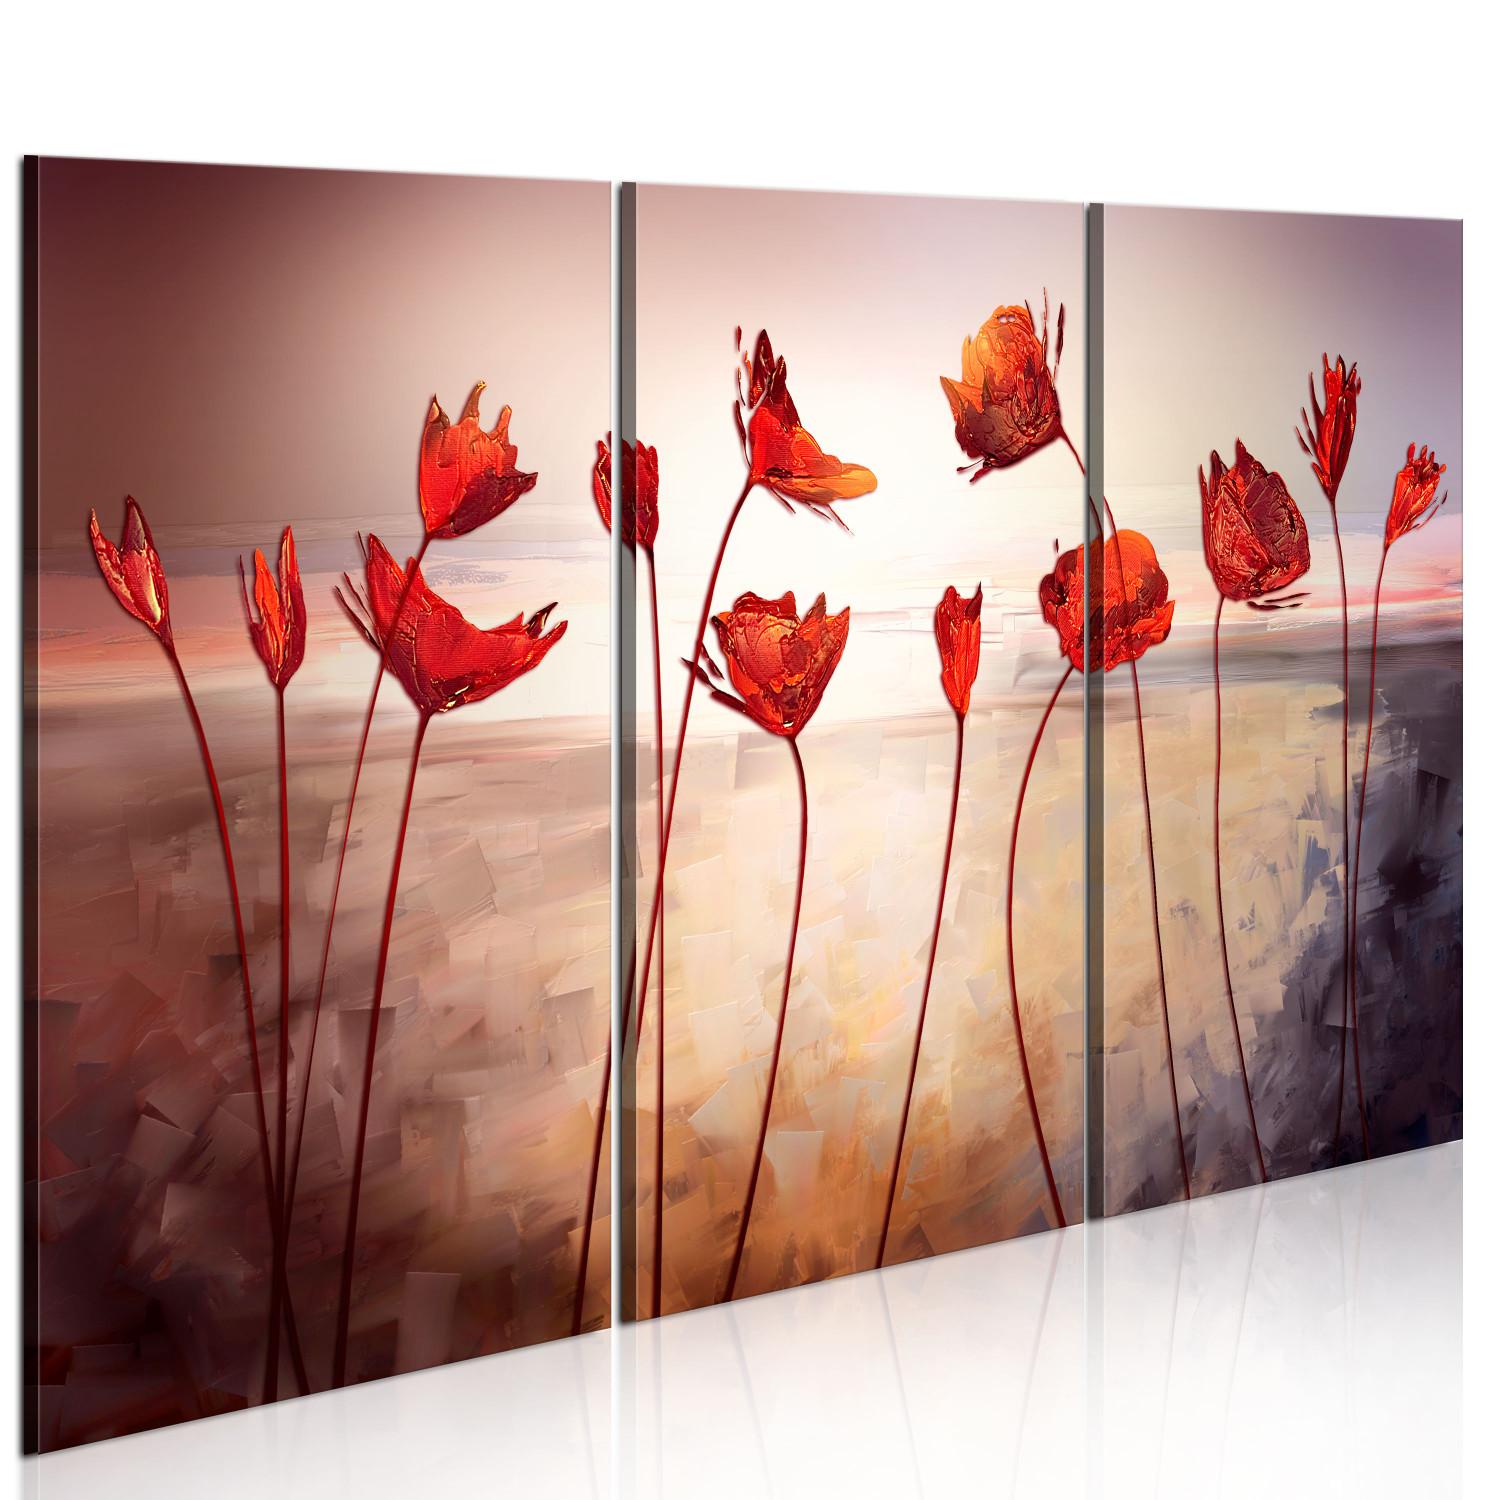 Cuadro moderno Bright red poppies